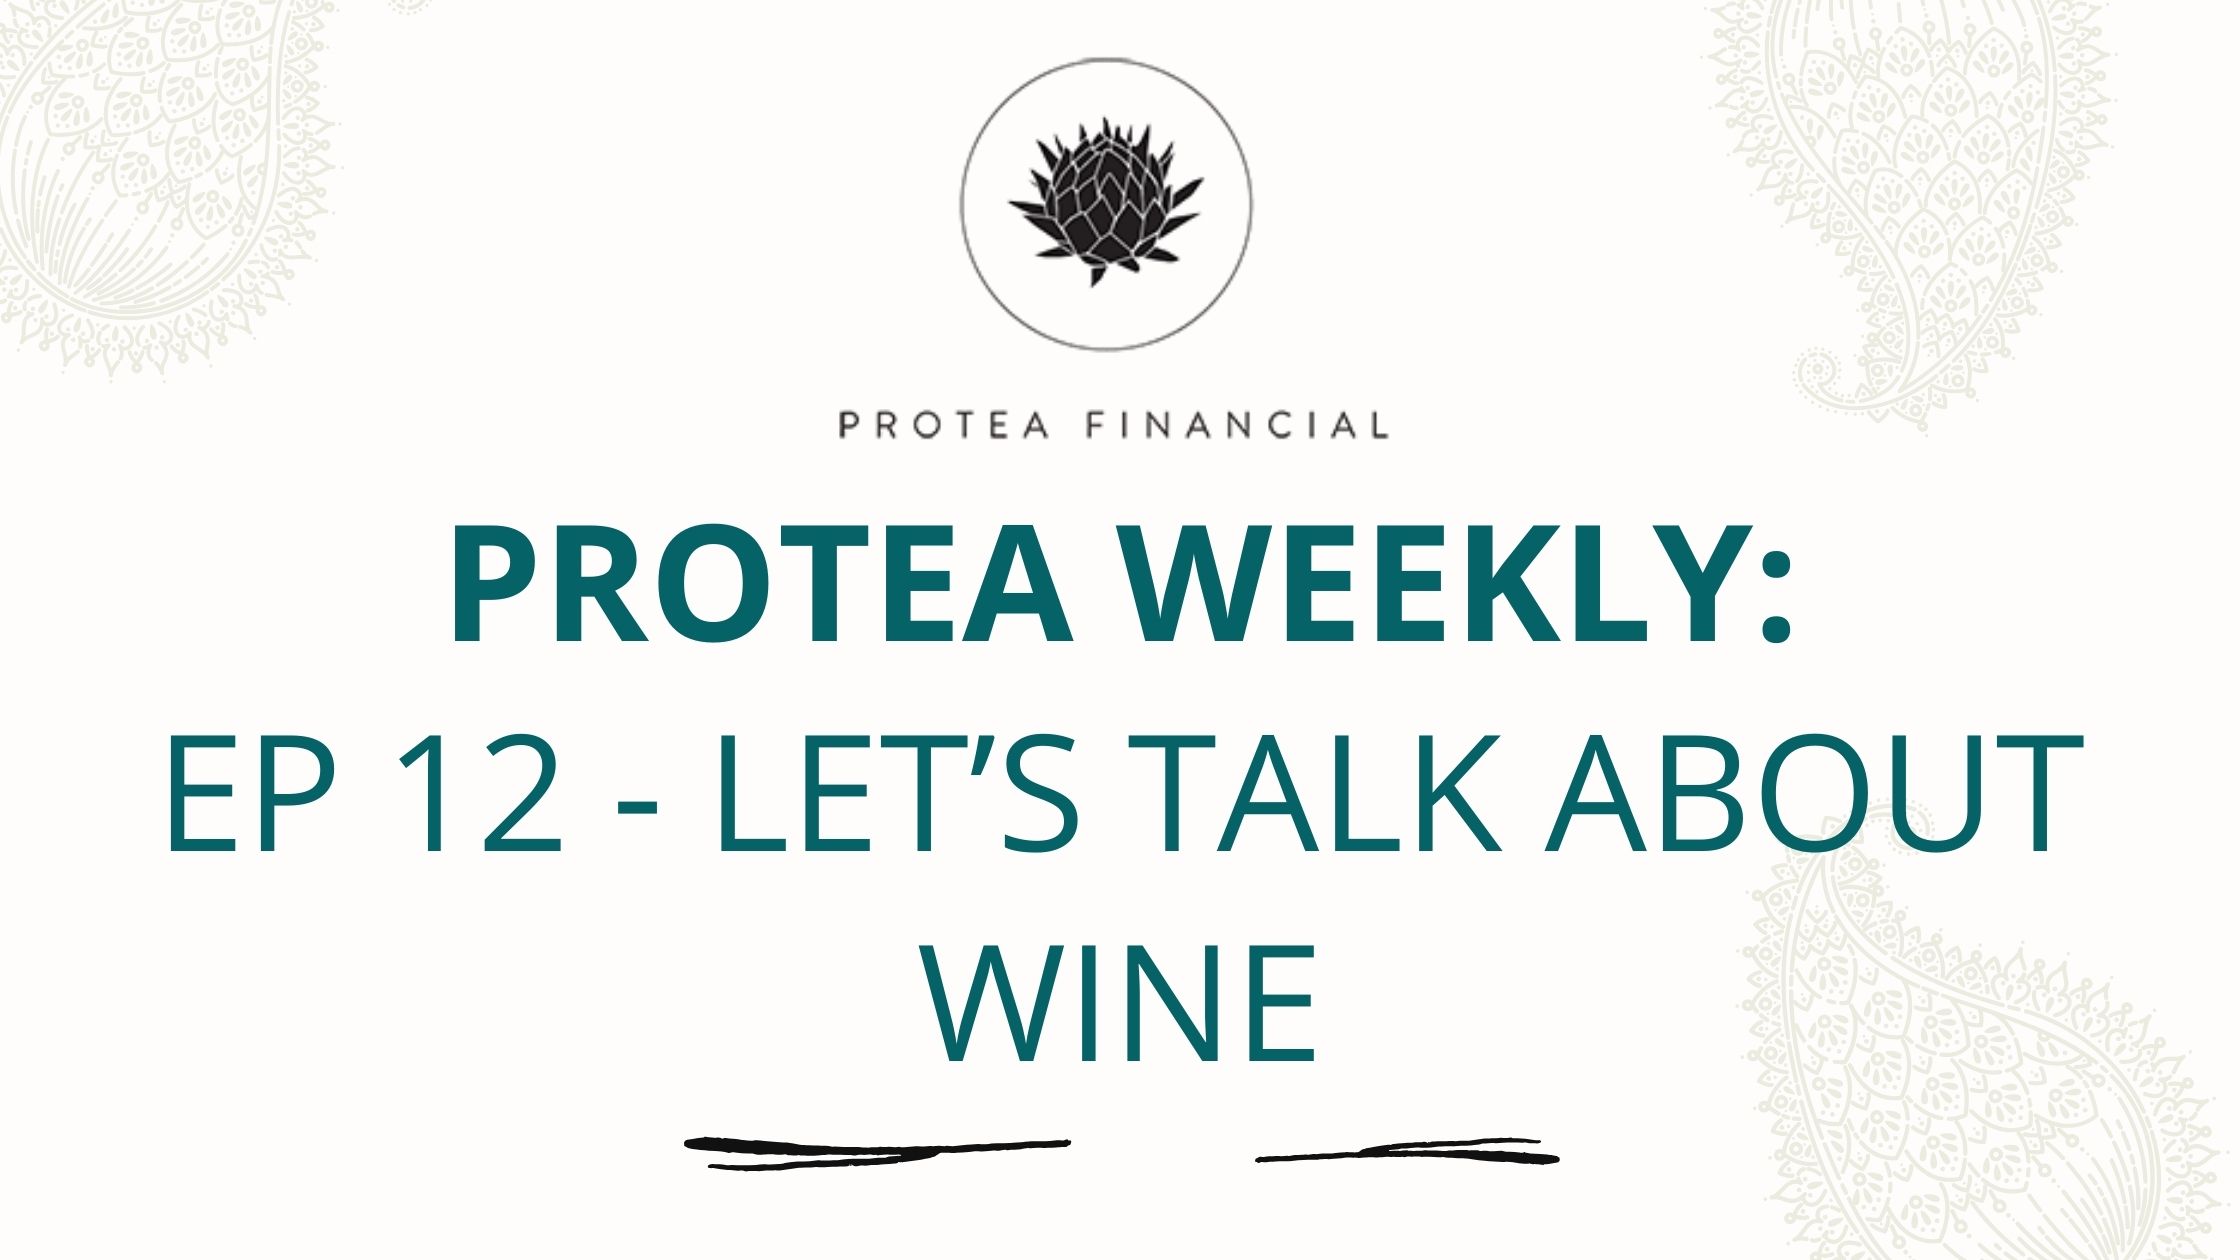 Protea Weekly Podcast – Episode 12 – Let’s Talk About Wine!